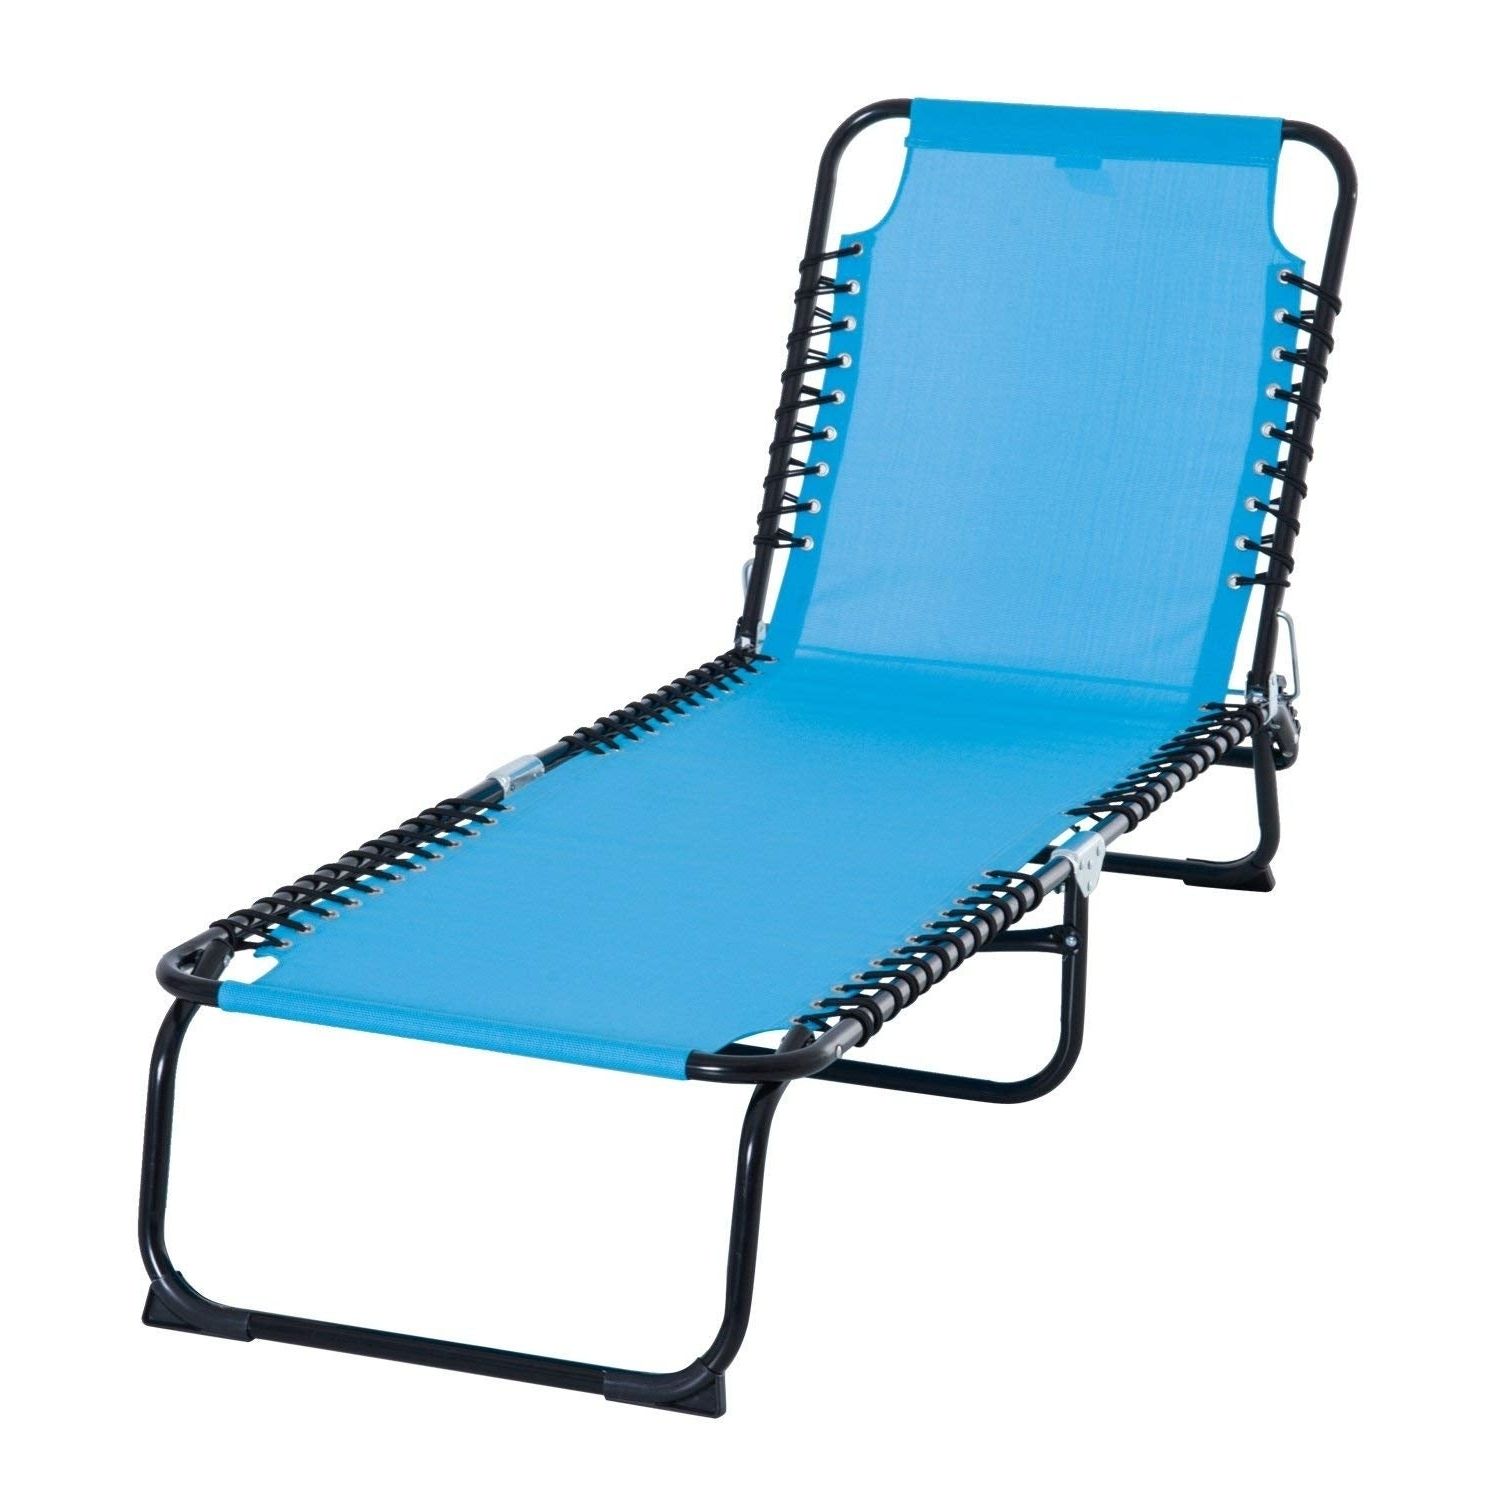 Outsunny 3 Position Portable Reclining Beach Chaise Lounge Folding Chair  Outdoor Patio – Dark Blue Regarding Well Known Portable Reclining Beach Chaise Lounge Folding Chairs (View 2 of 25)